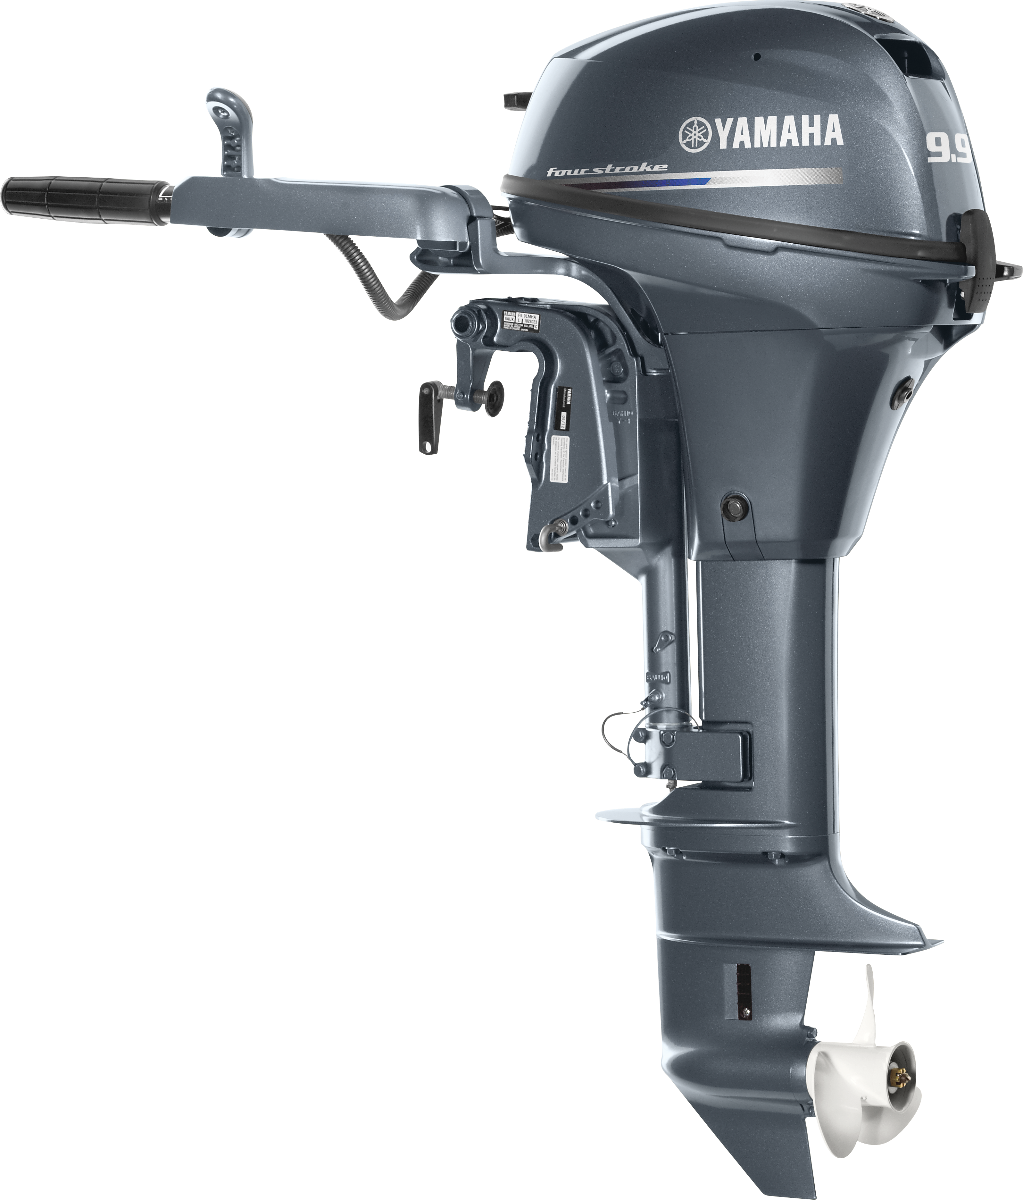 Yamaha T9.9XPHB - High Thrust Portable 4-Stroke Outboard Motor - 9.9 HP - 25" Shaft - Electric Start w/ PT&T